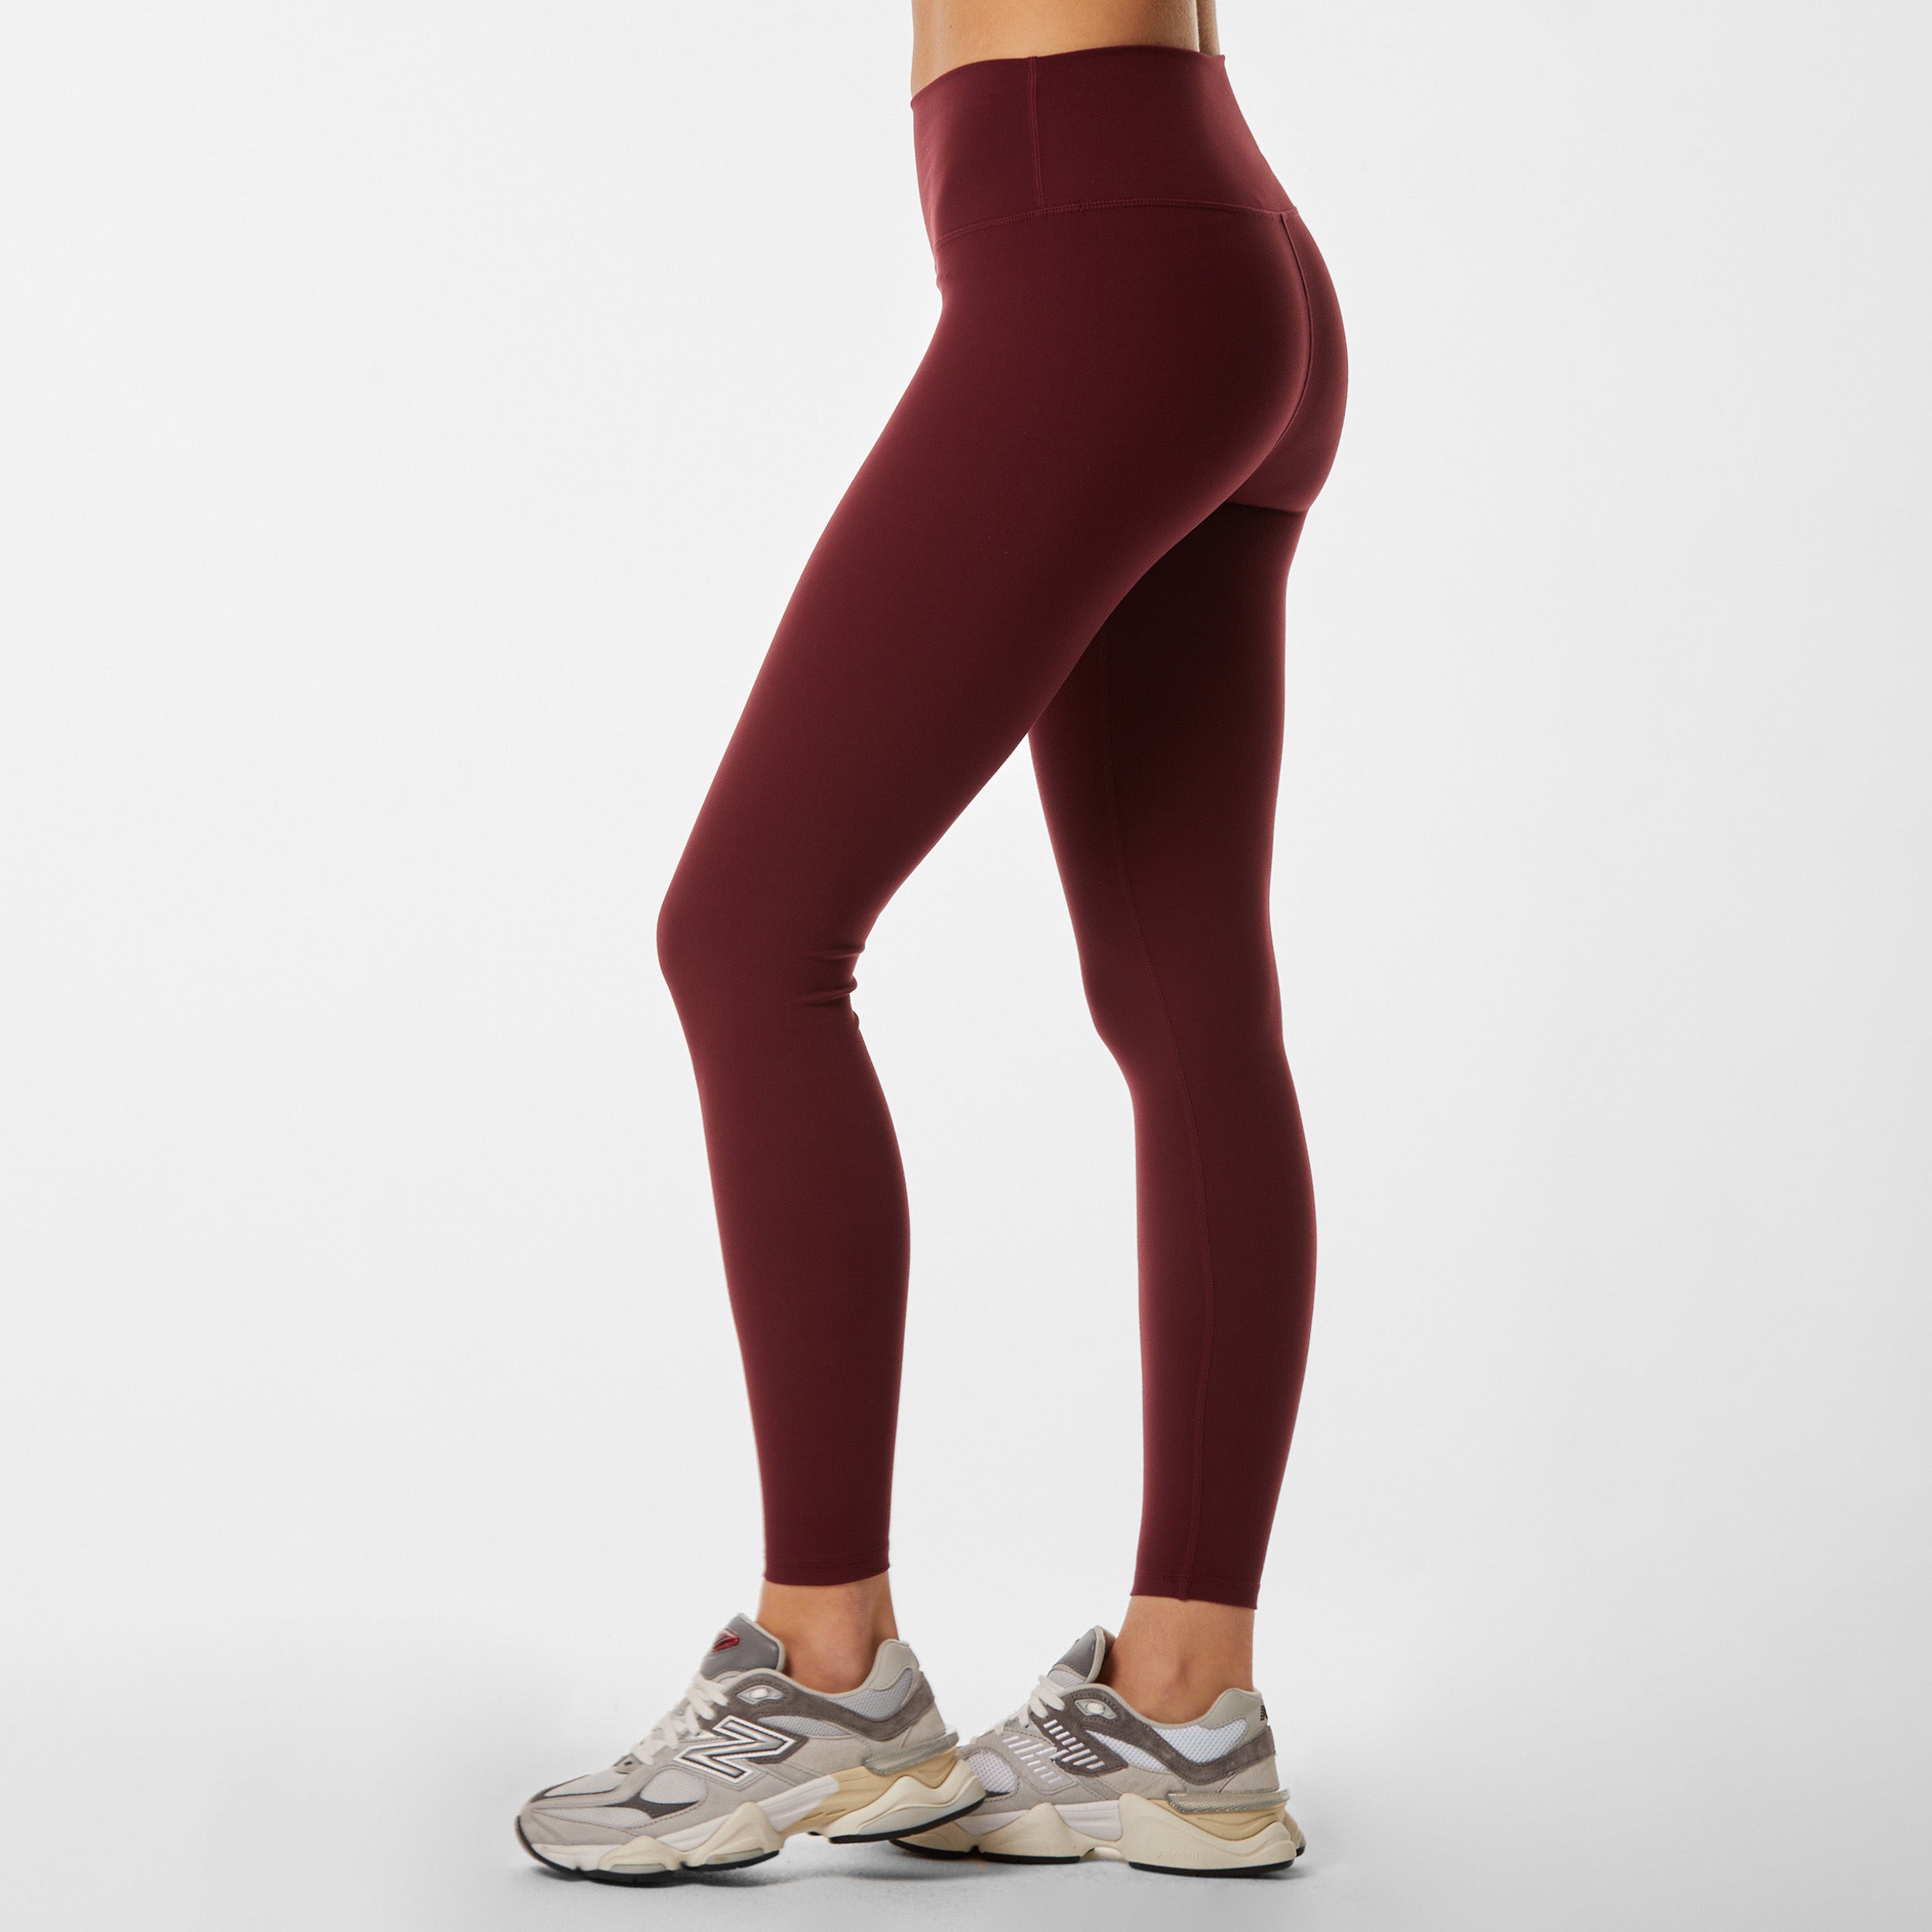 Side view of woman wearing sculpting and flattering red legging